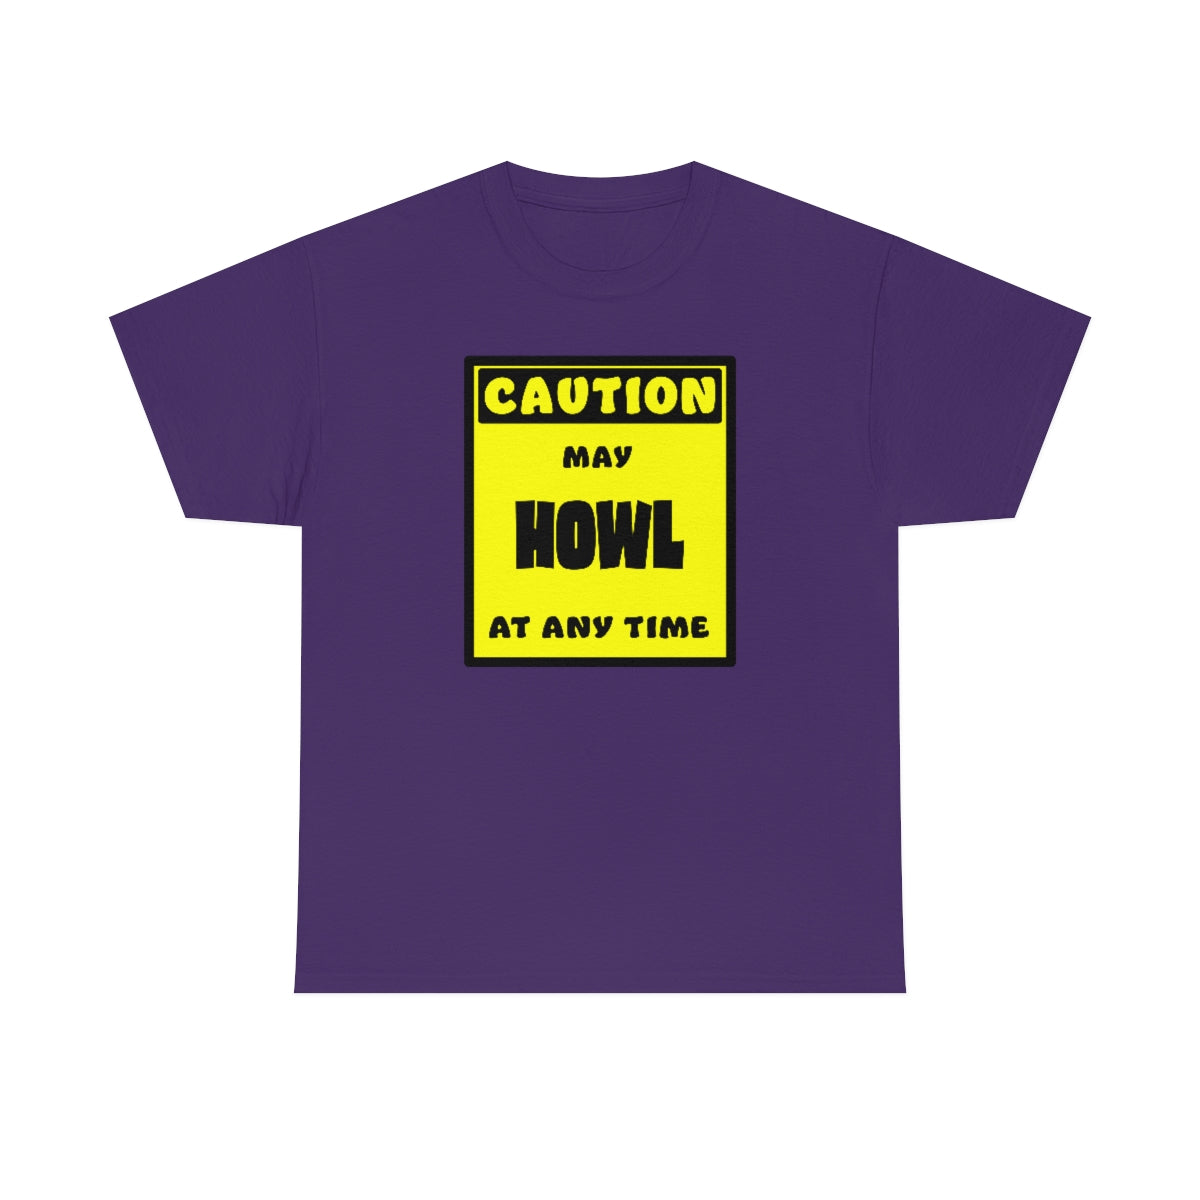 CAUTION! May HOWL at any time! - T-Shirt T-Shirt AFLT-Whootorca Purple S 